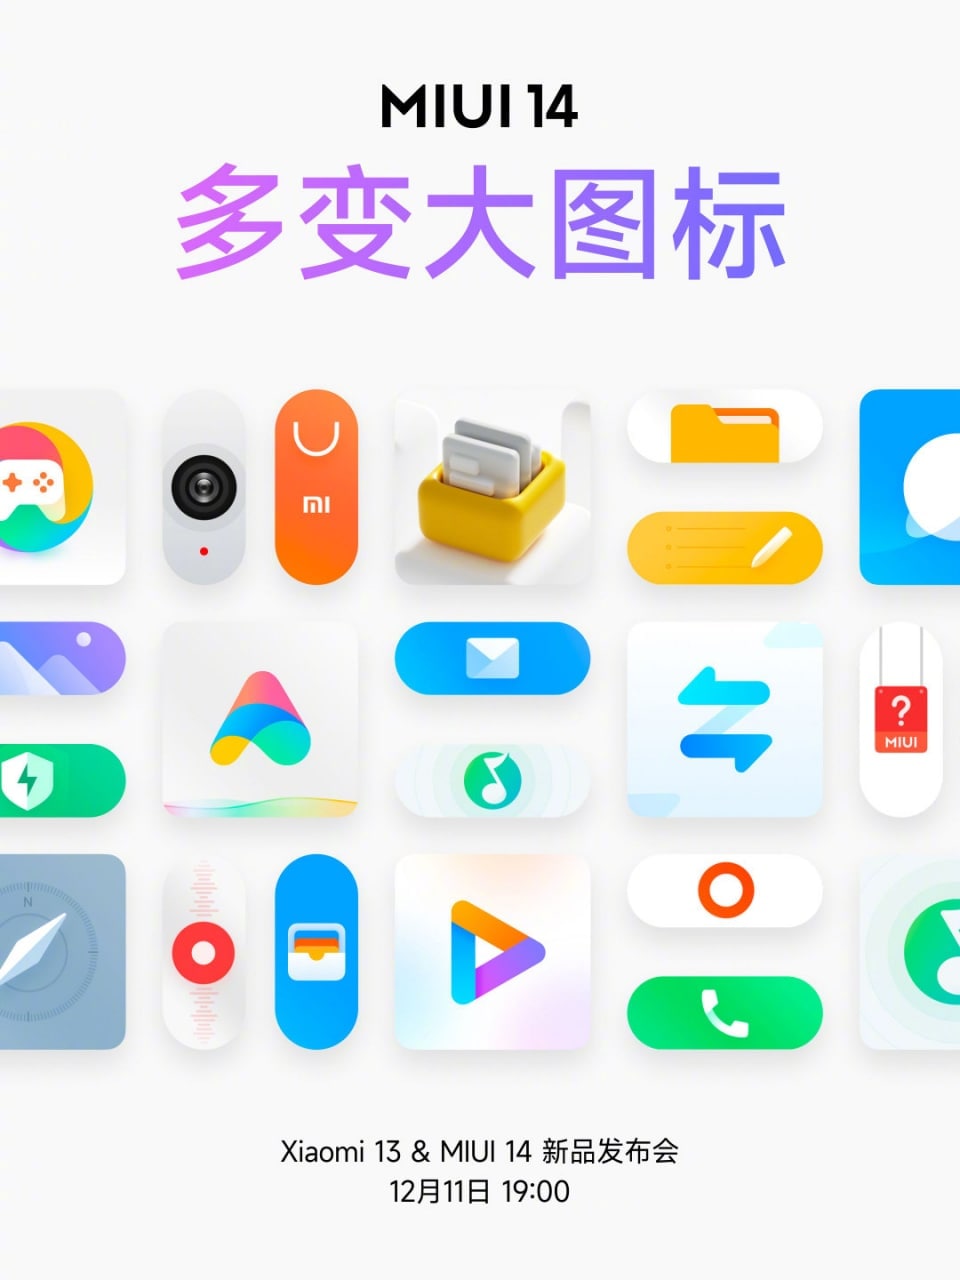 Xiaomi MIUI 14 will bring unique 'size changeable' super icons feature